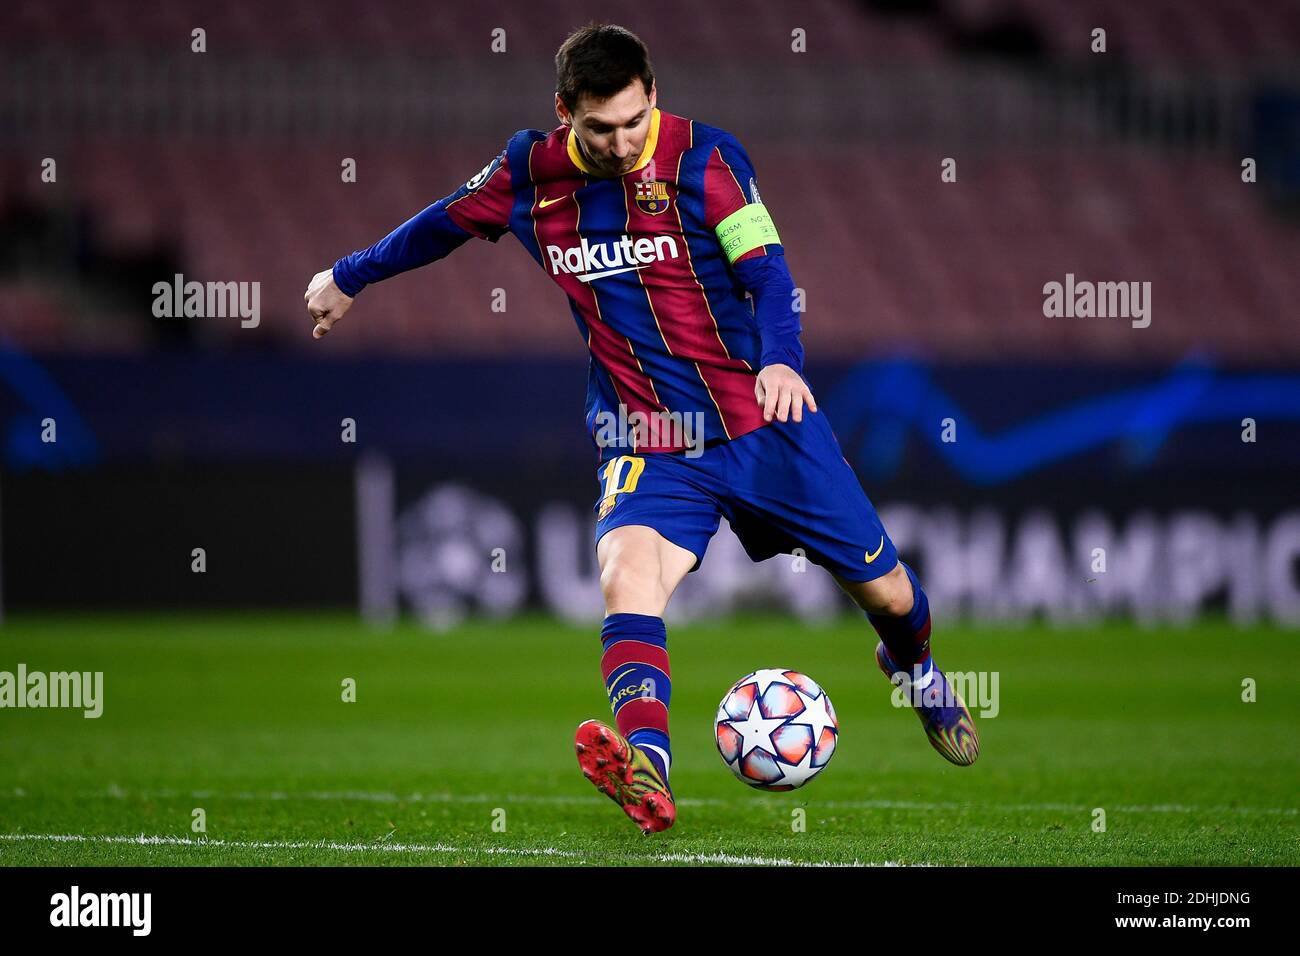 Barcelona, Spain - 08 December, 2020: Lionel Messi of FC Barcelona kicks  the ball during the UEFA Champions League Group G football match between FC  Barcelona and Juventus. Juventus FC won 3-0